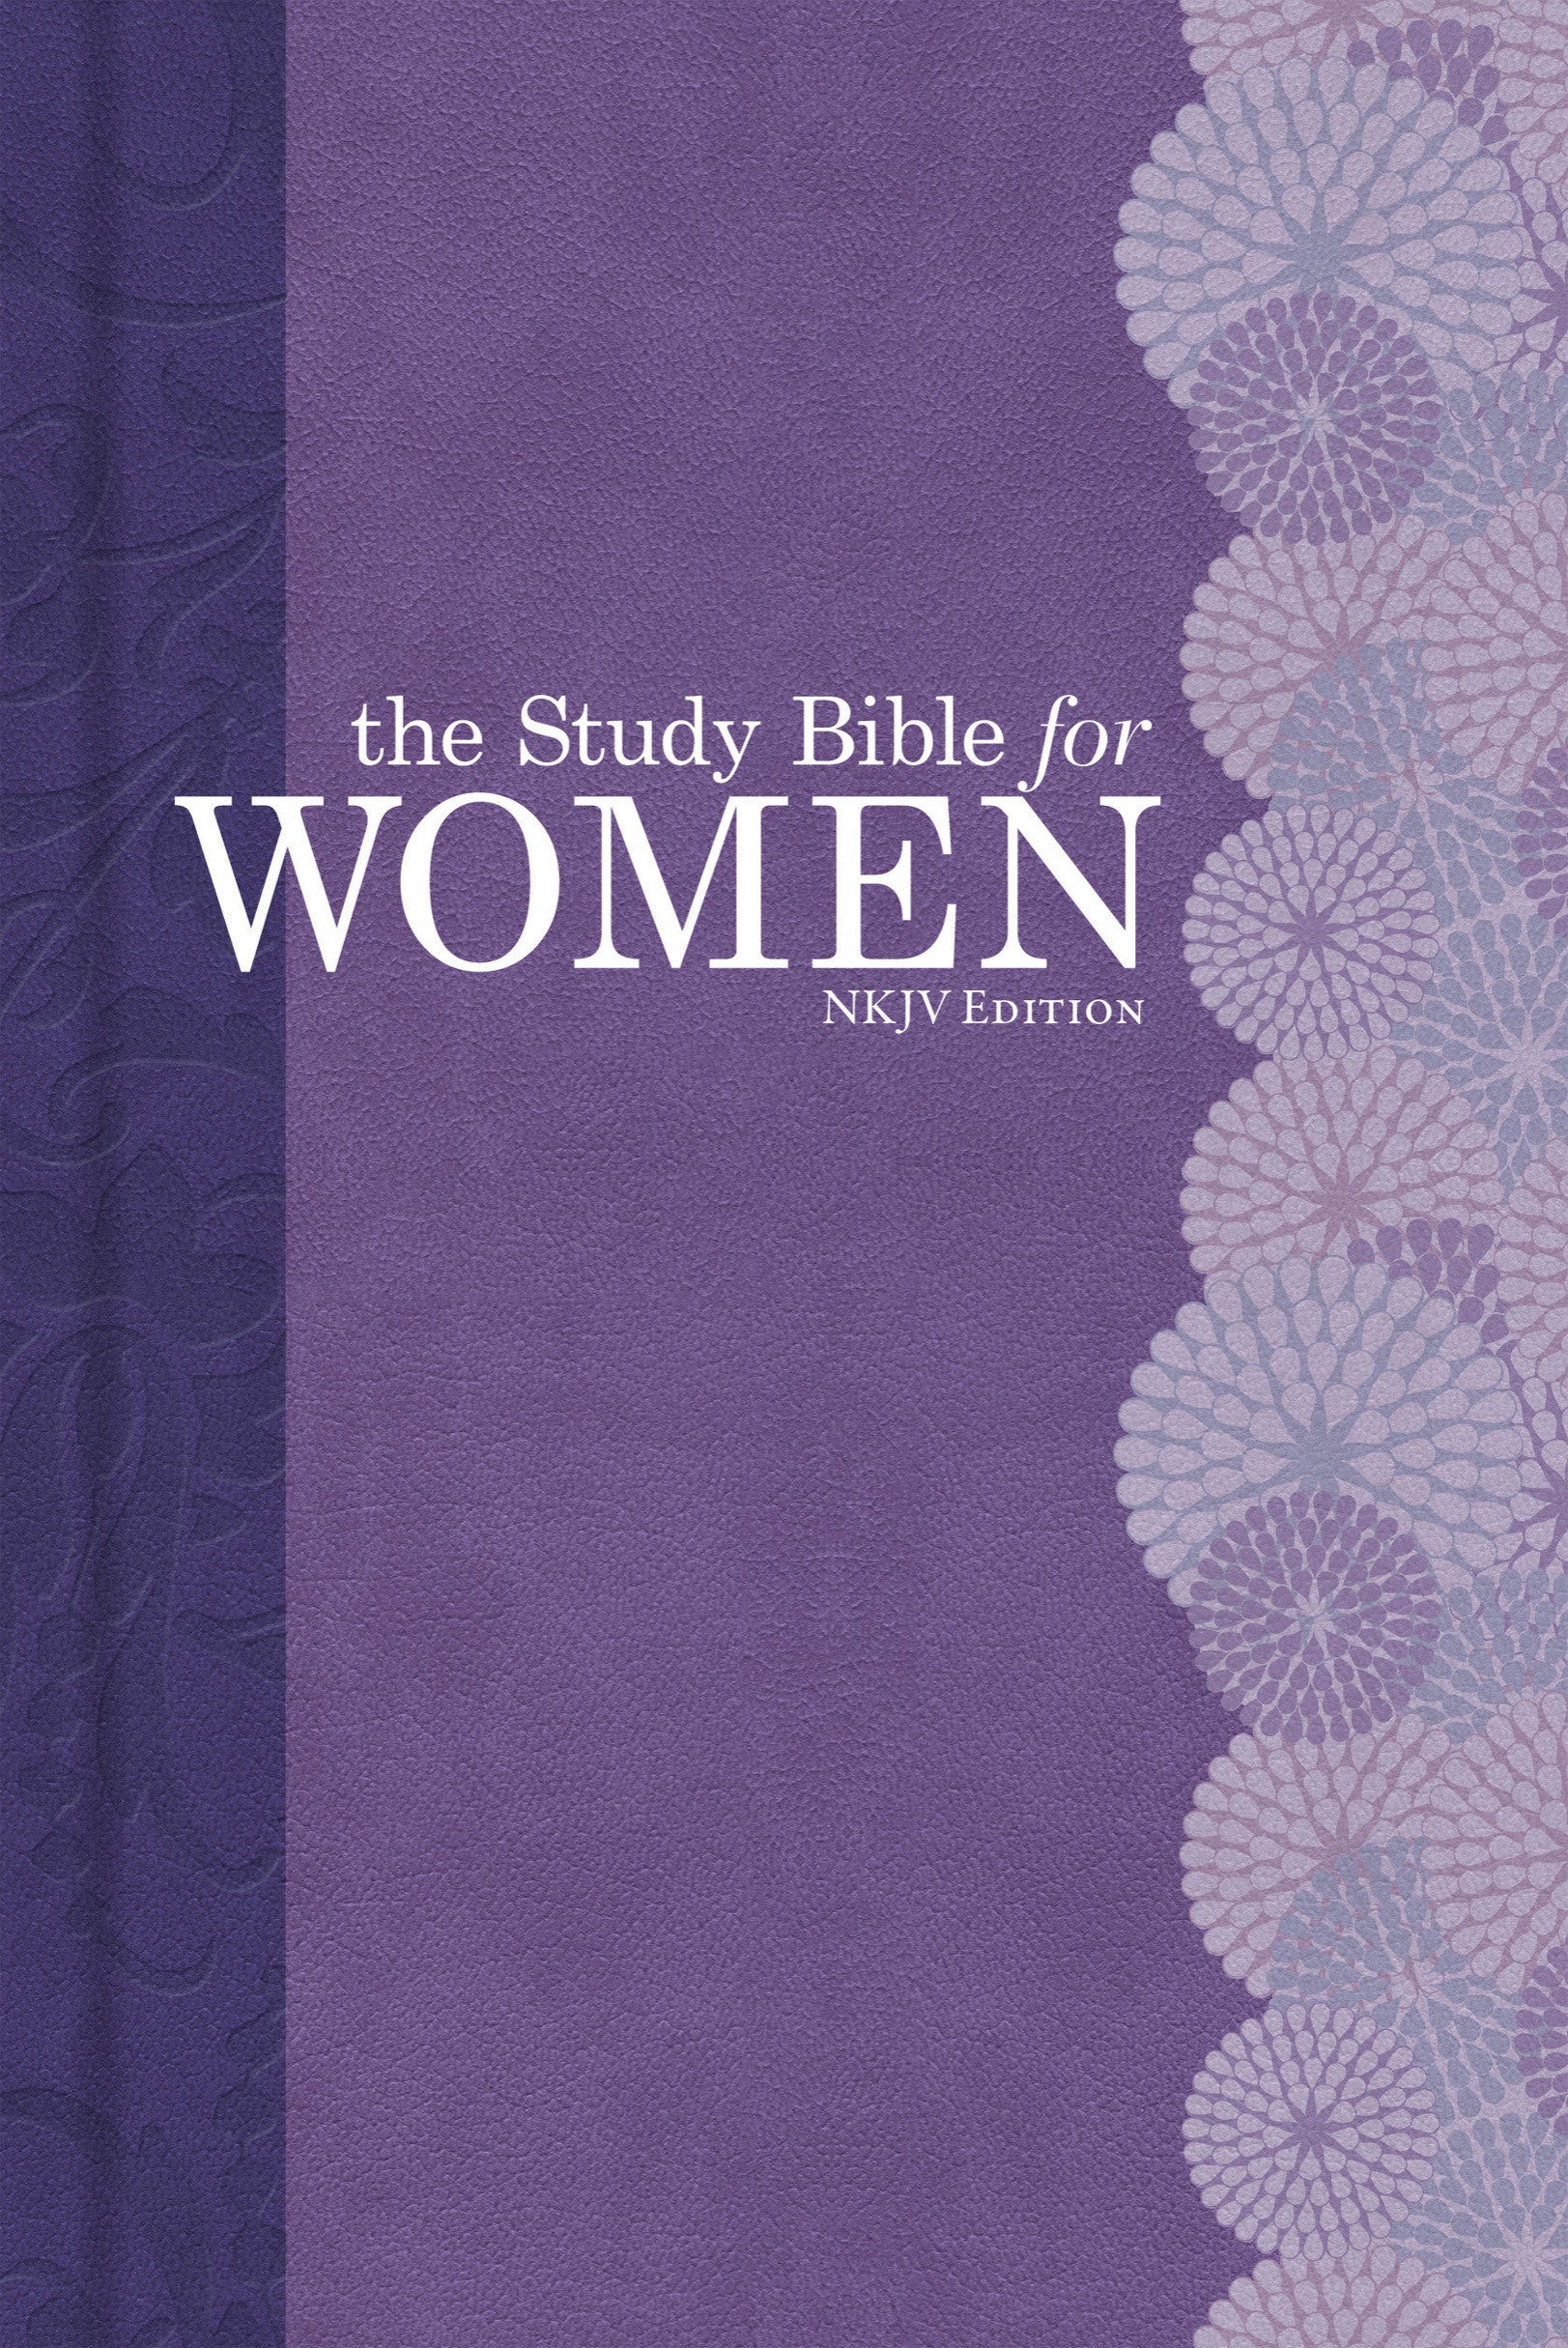 Image of NKJV Study Bible For Women, Personal Size Edition Hardco, Th other